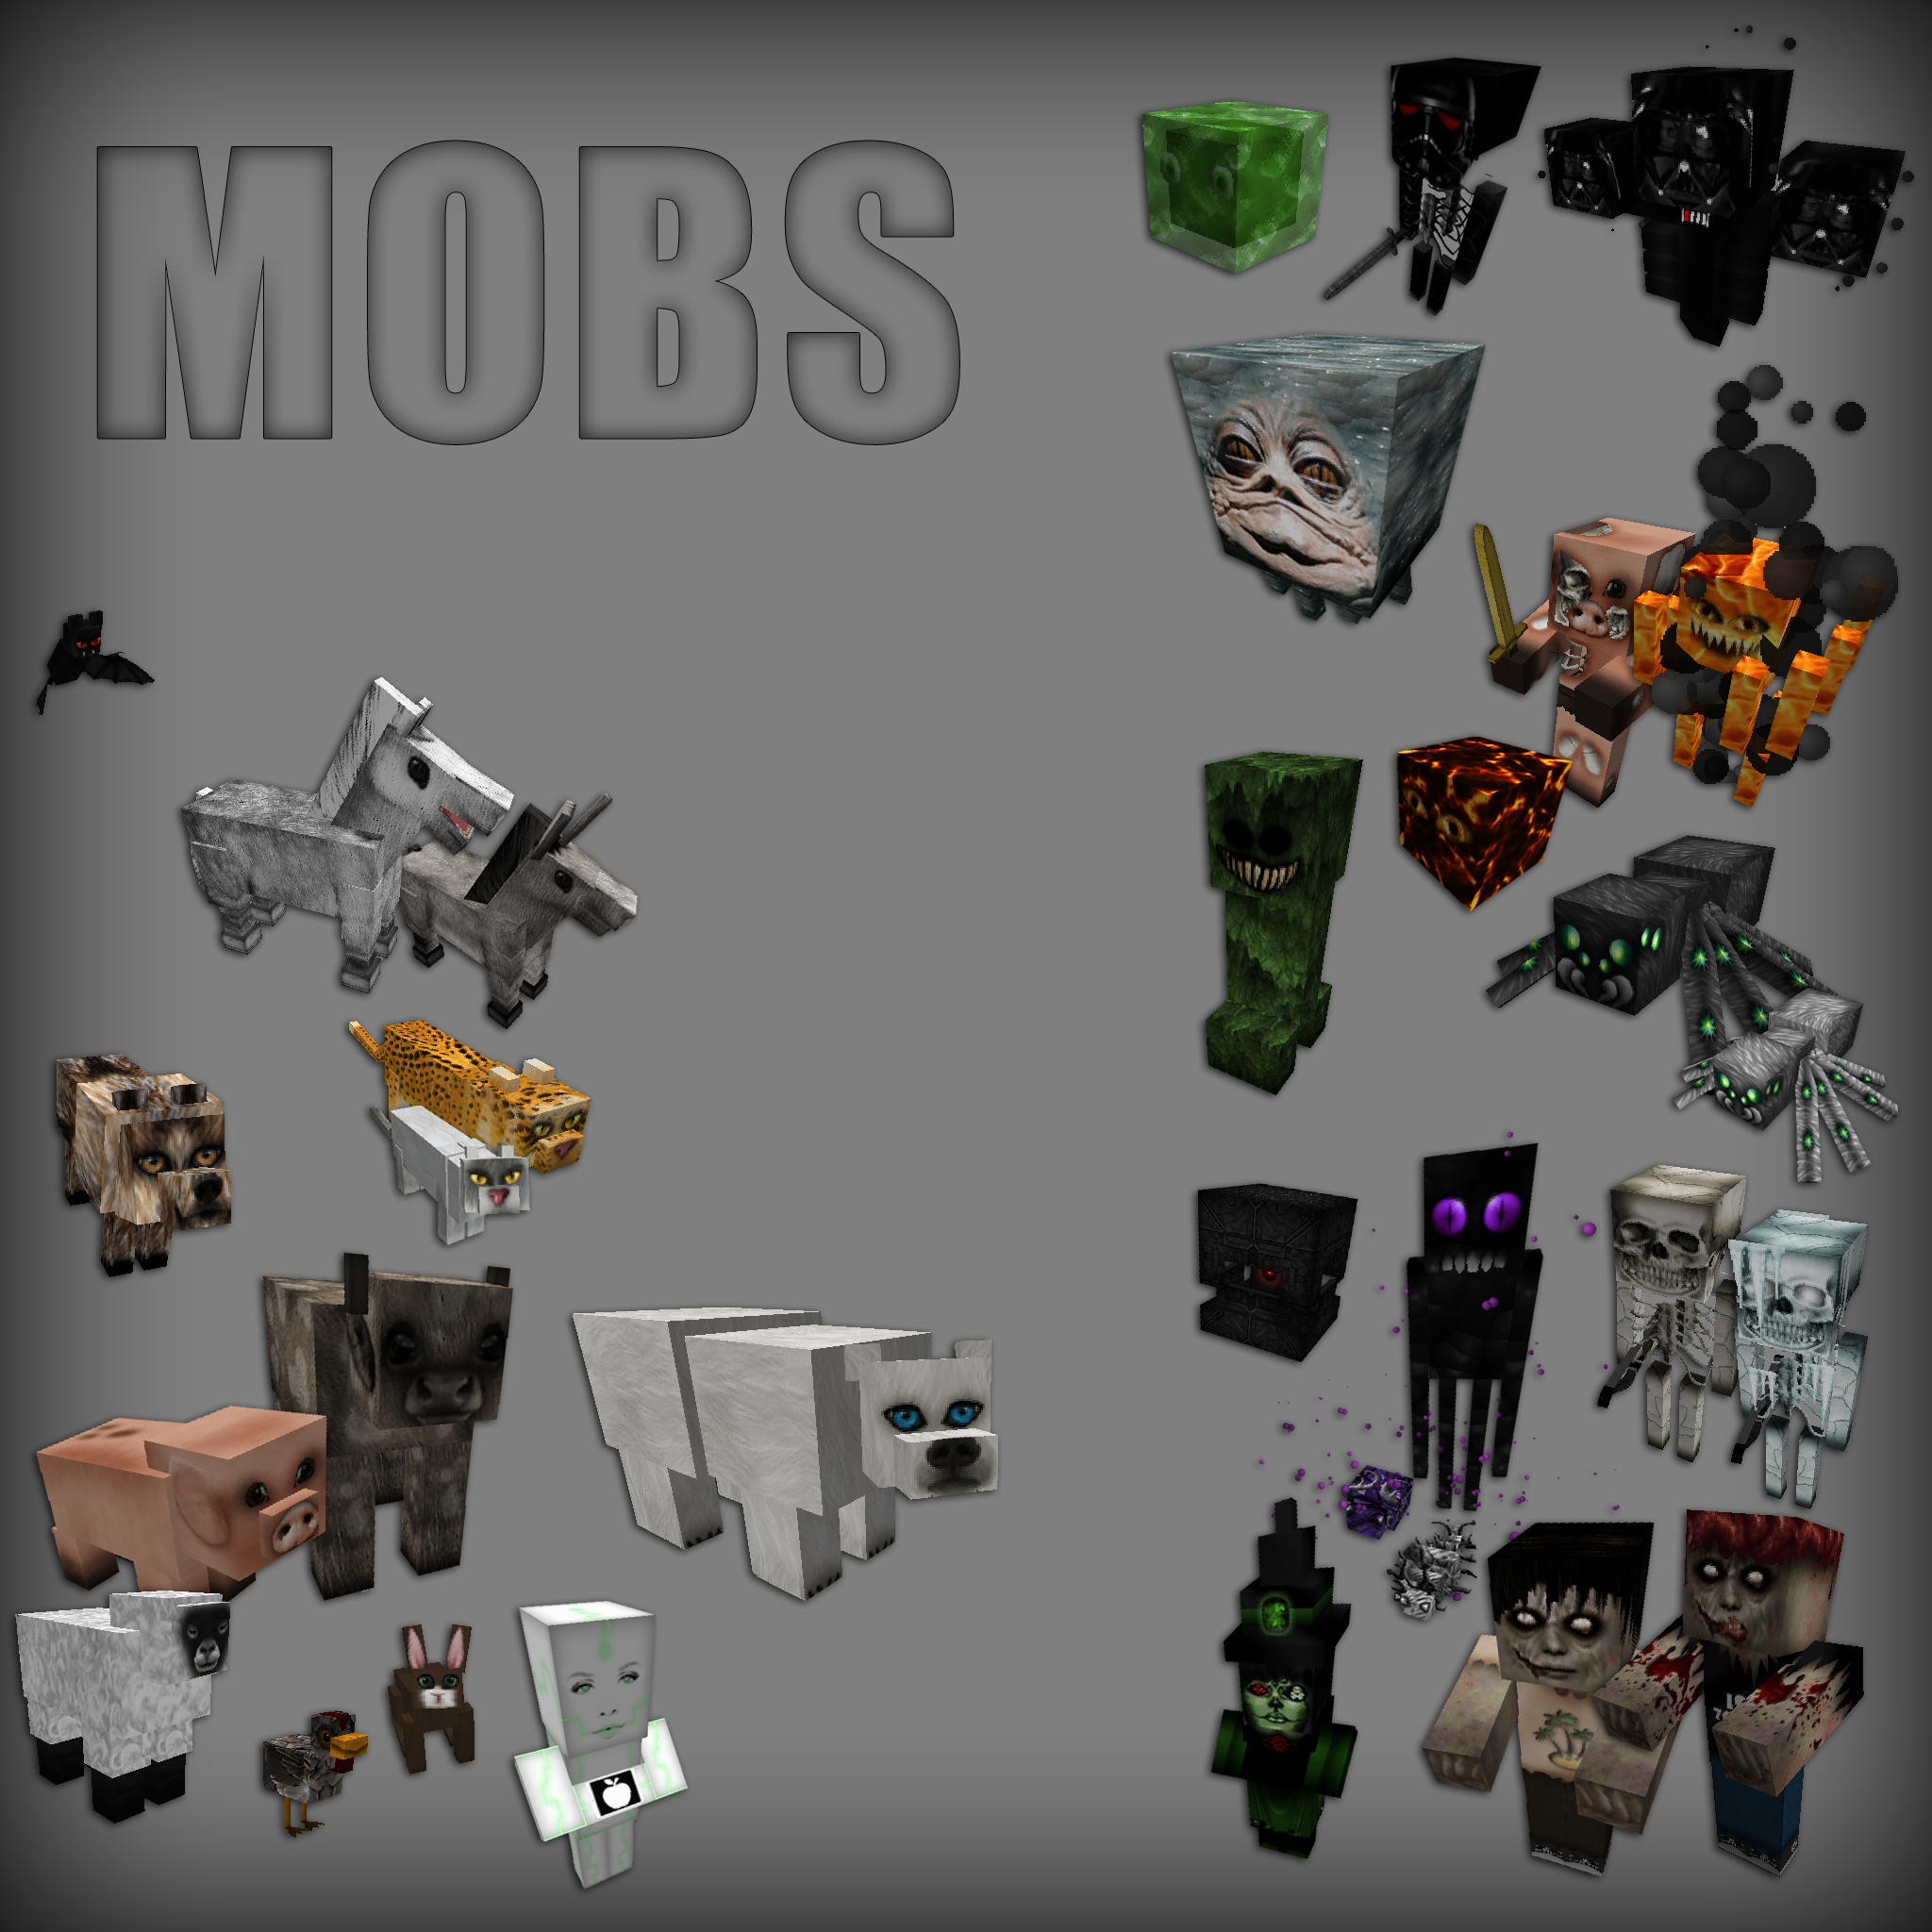 minecraft animated texture mobs resource pack